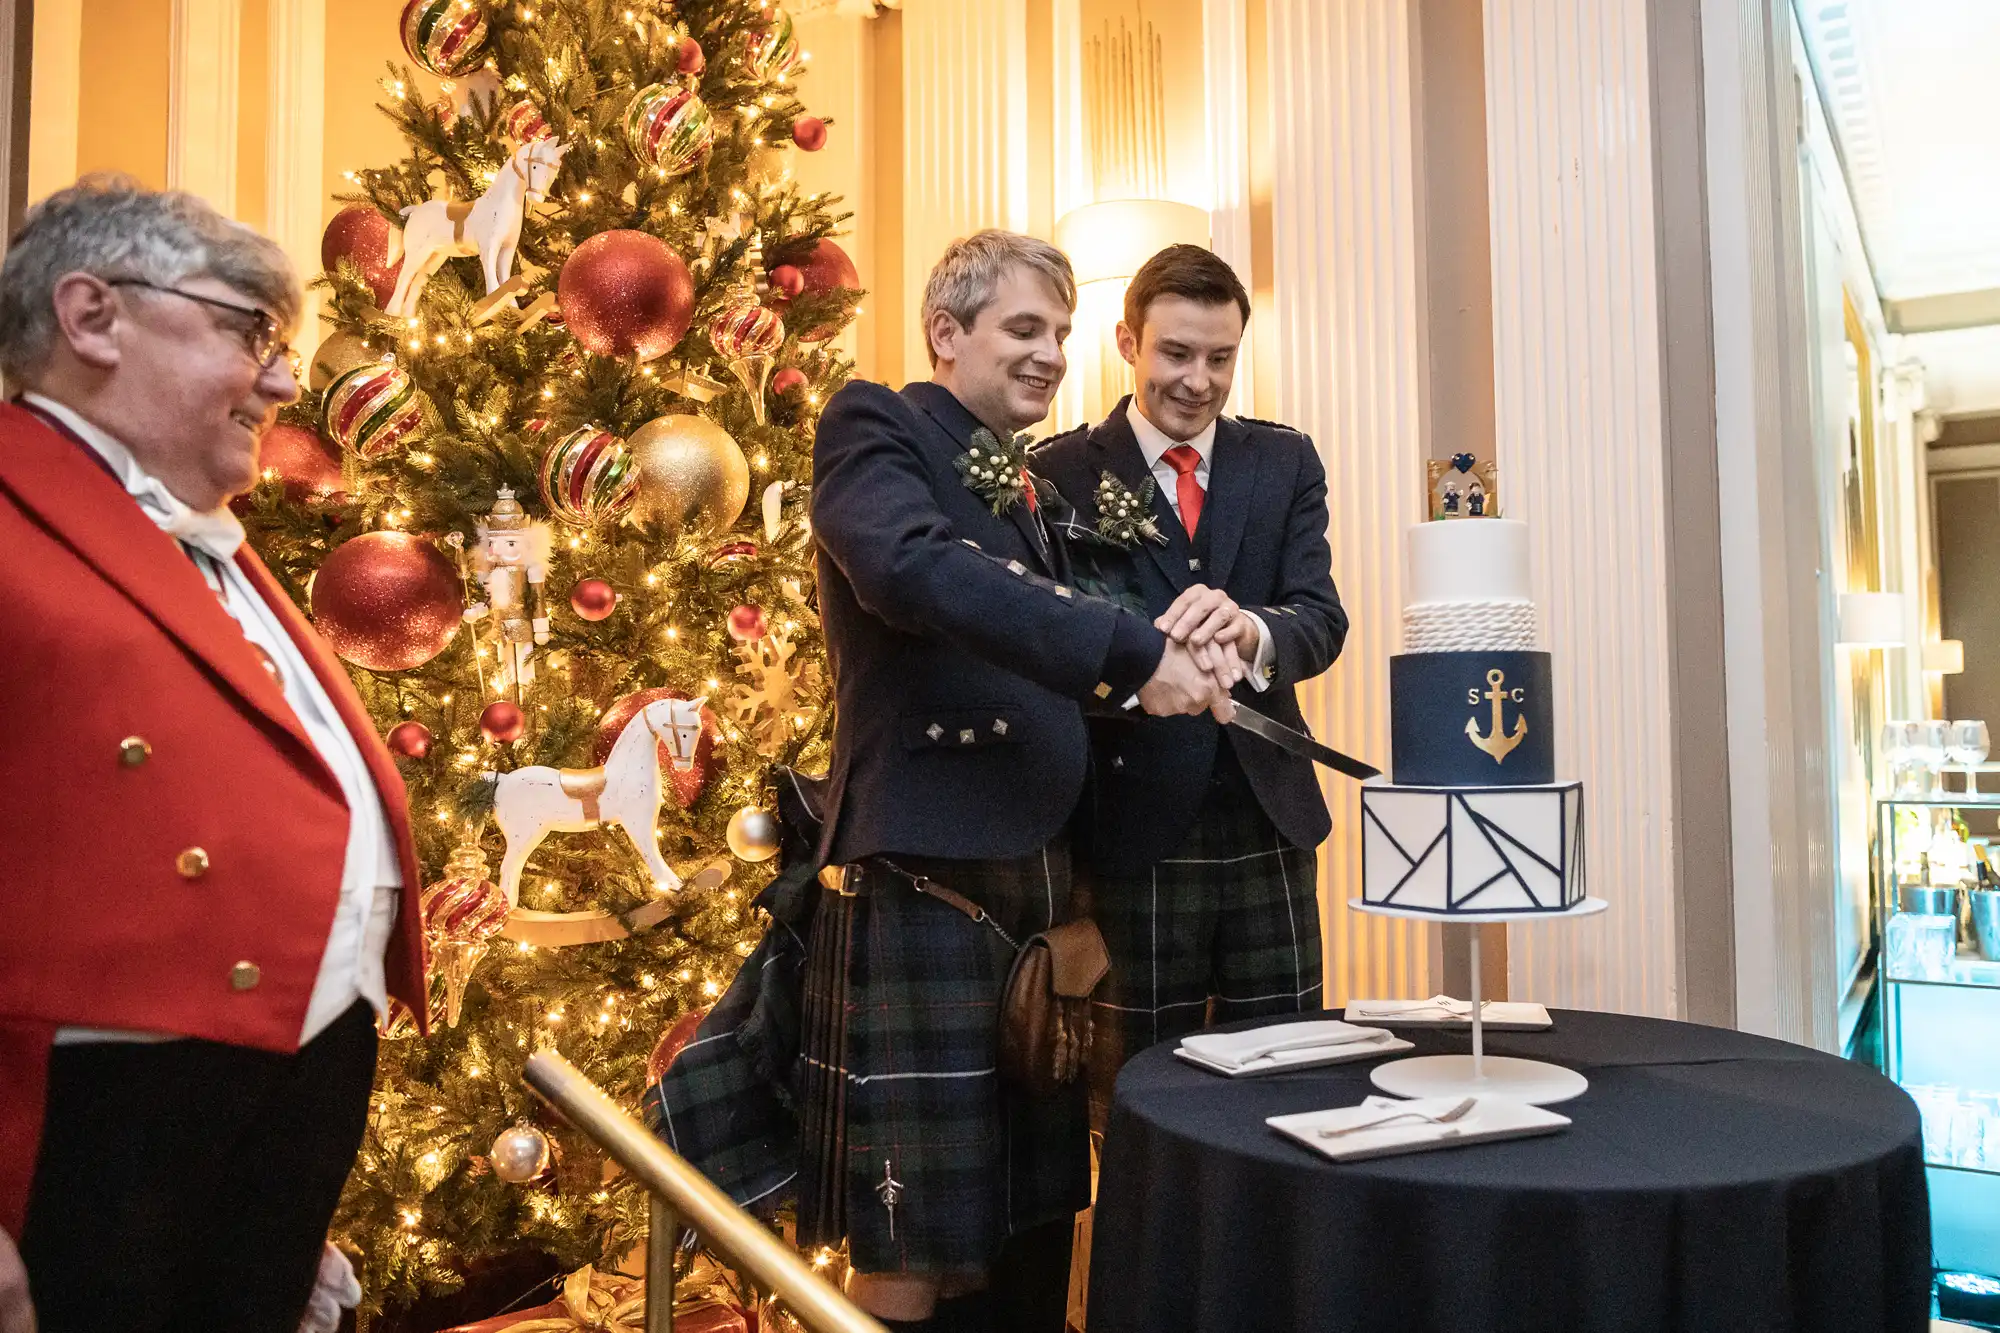 Two men in kilts are cutting a tiered cake together at a ceremony in front of a Christmas tree, while another person in a red jacket watches.